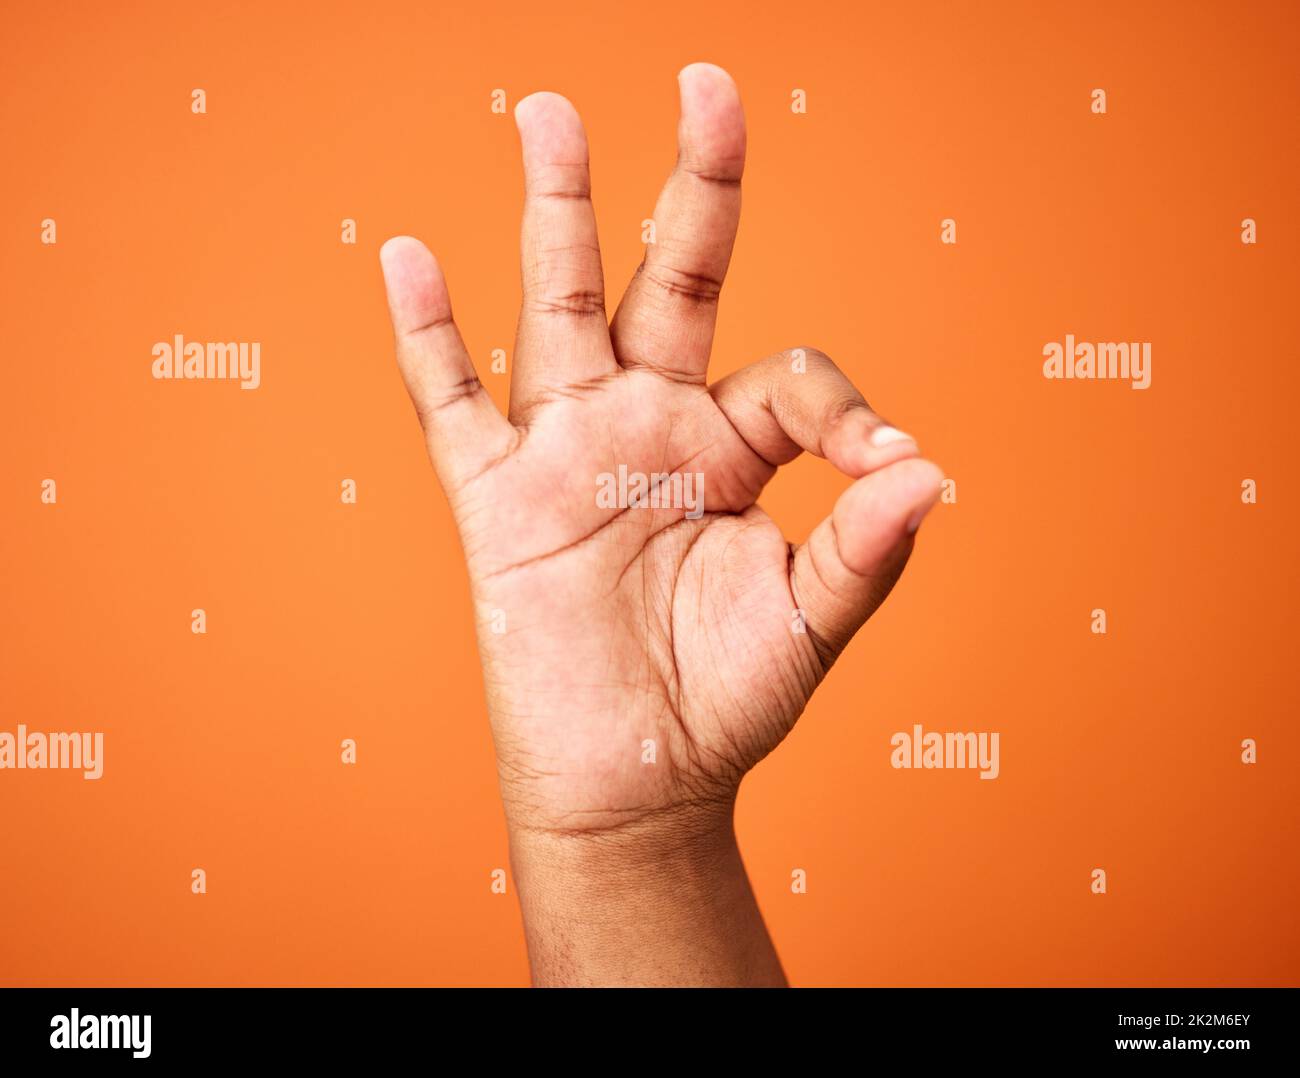 Everythings going to be just fine. Shot of an unrecognizable person showing a hand gesture against an orange background. Stock Photo